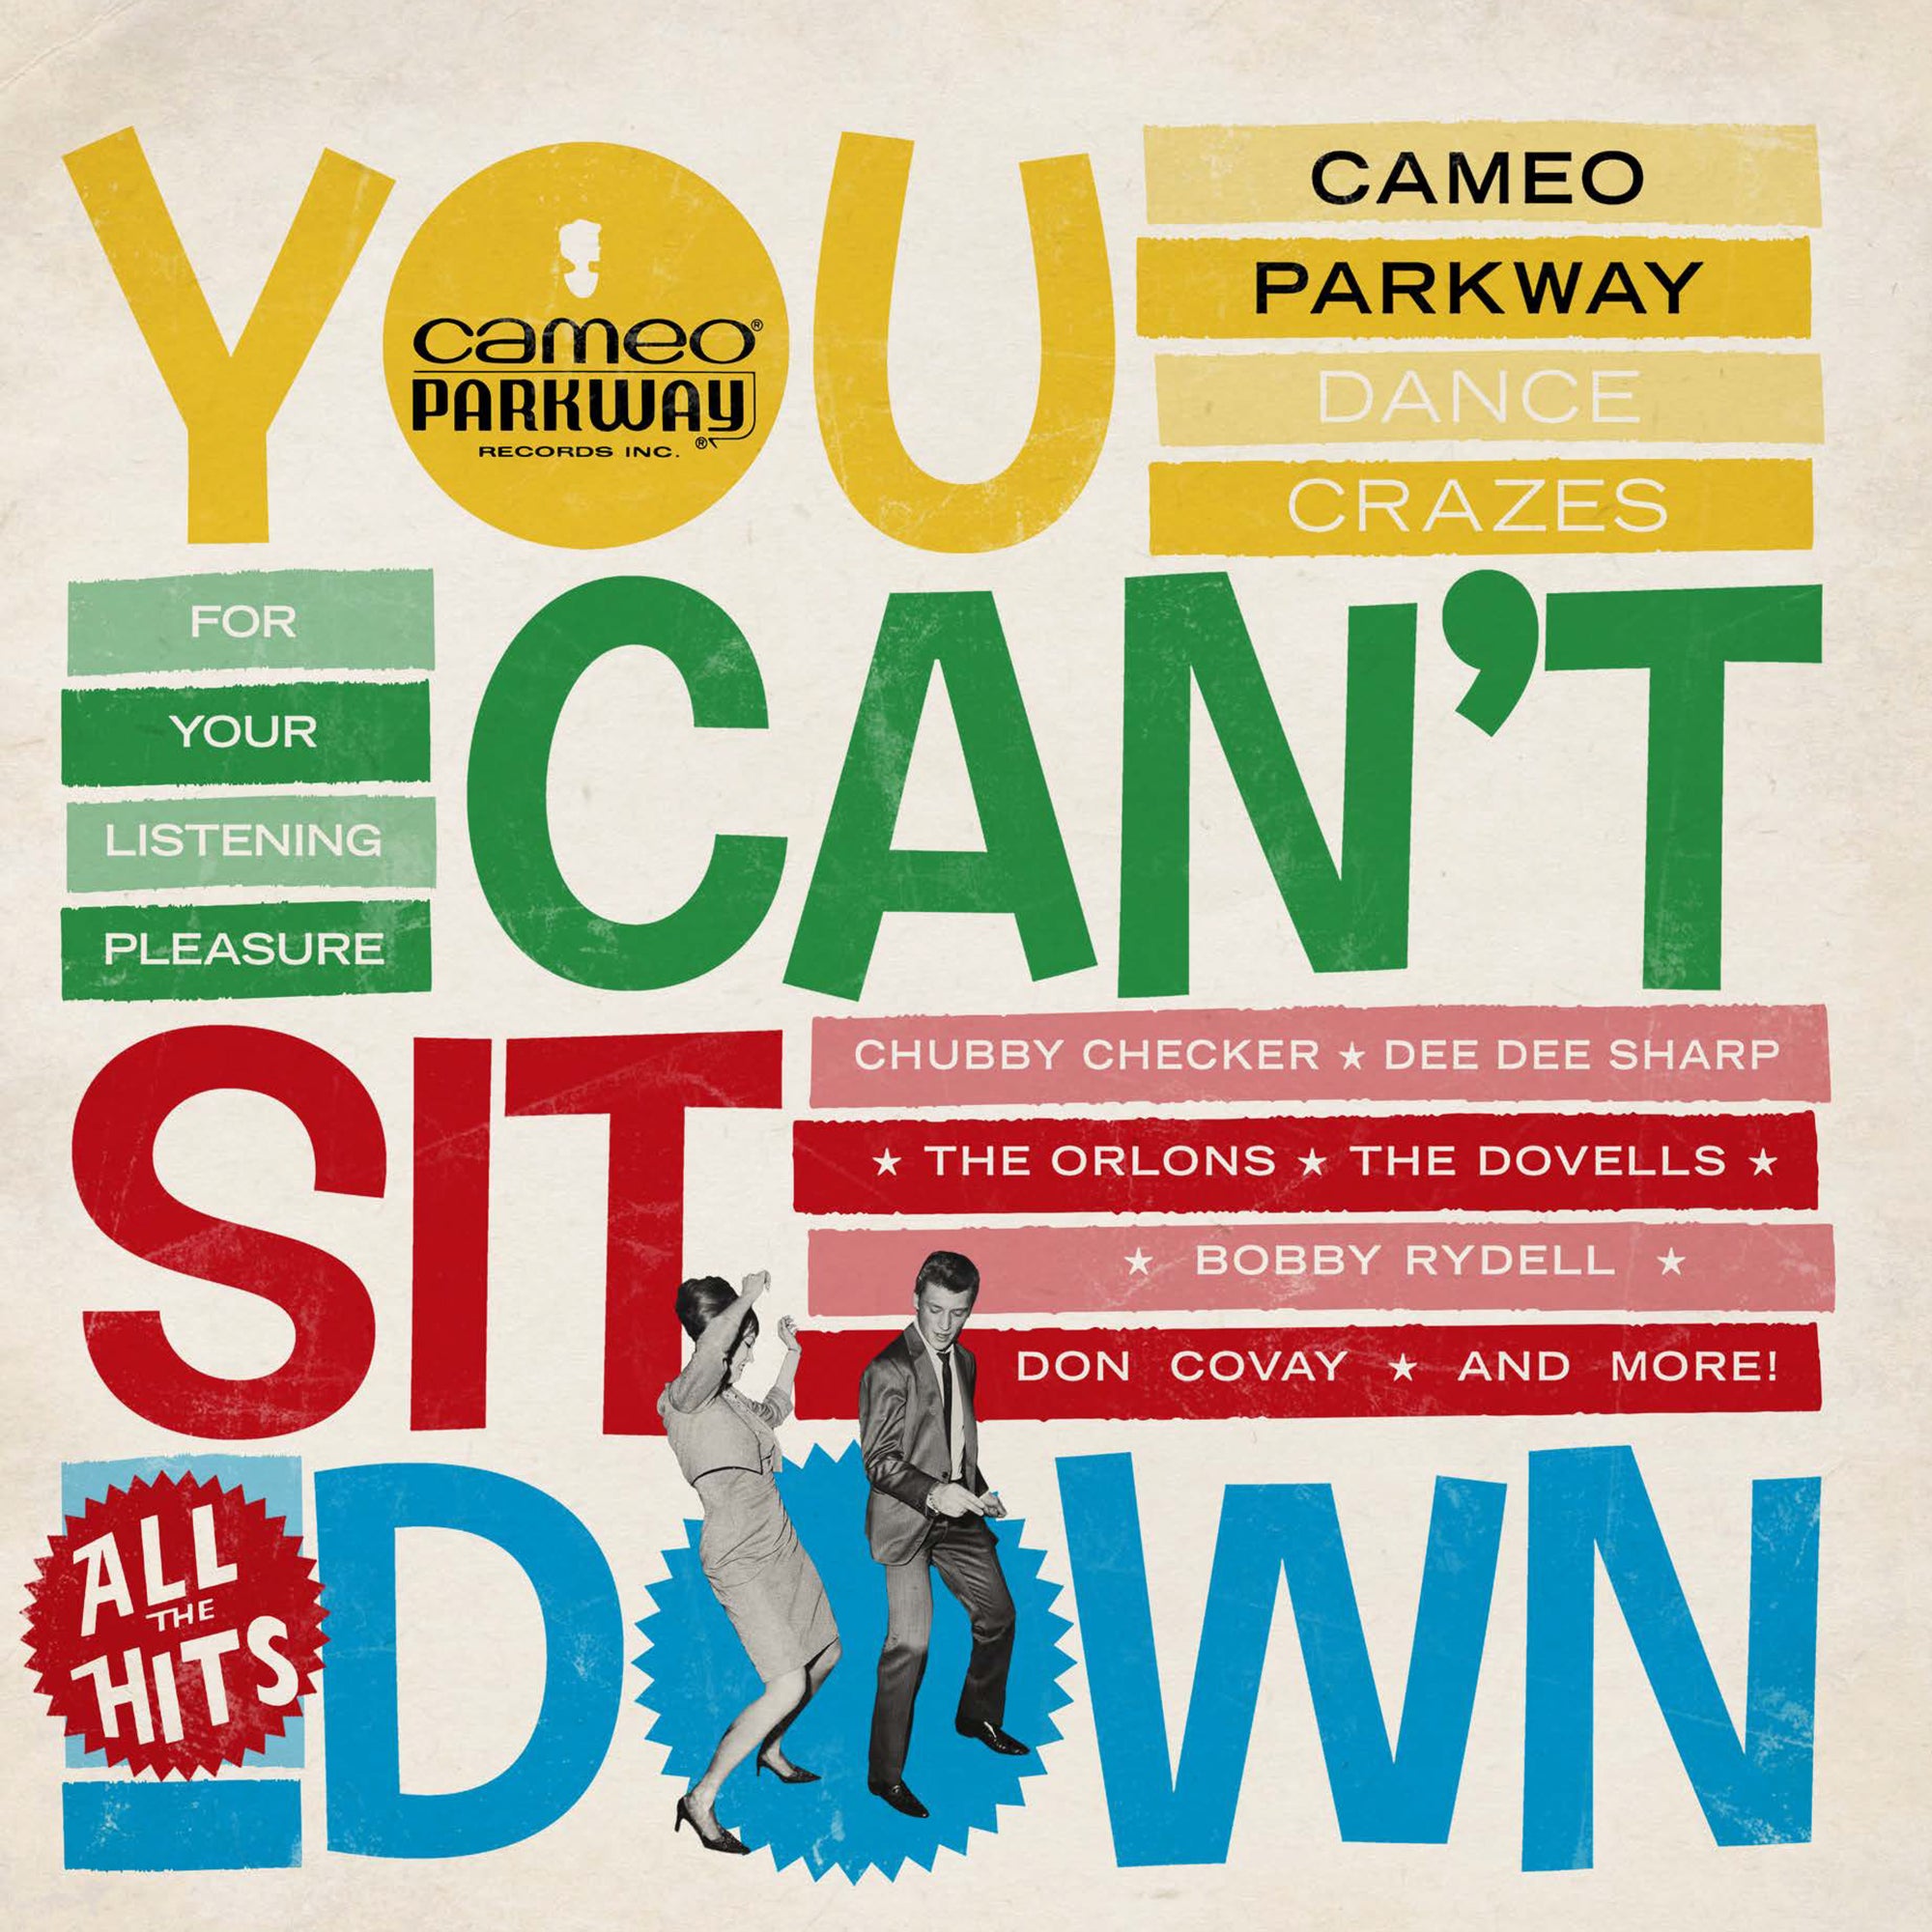 You Can't Sit Down: Cameo Parkway Dance Crazes 1958-1964 (U.K. Collection)